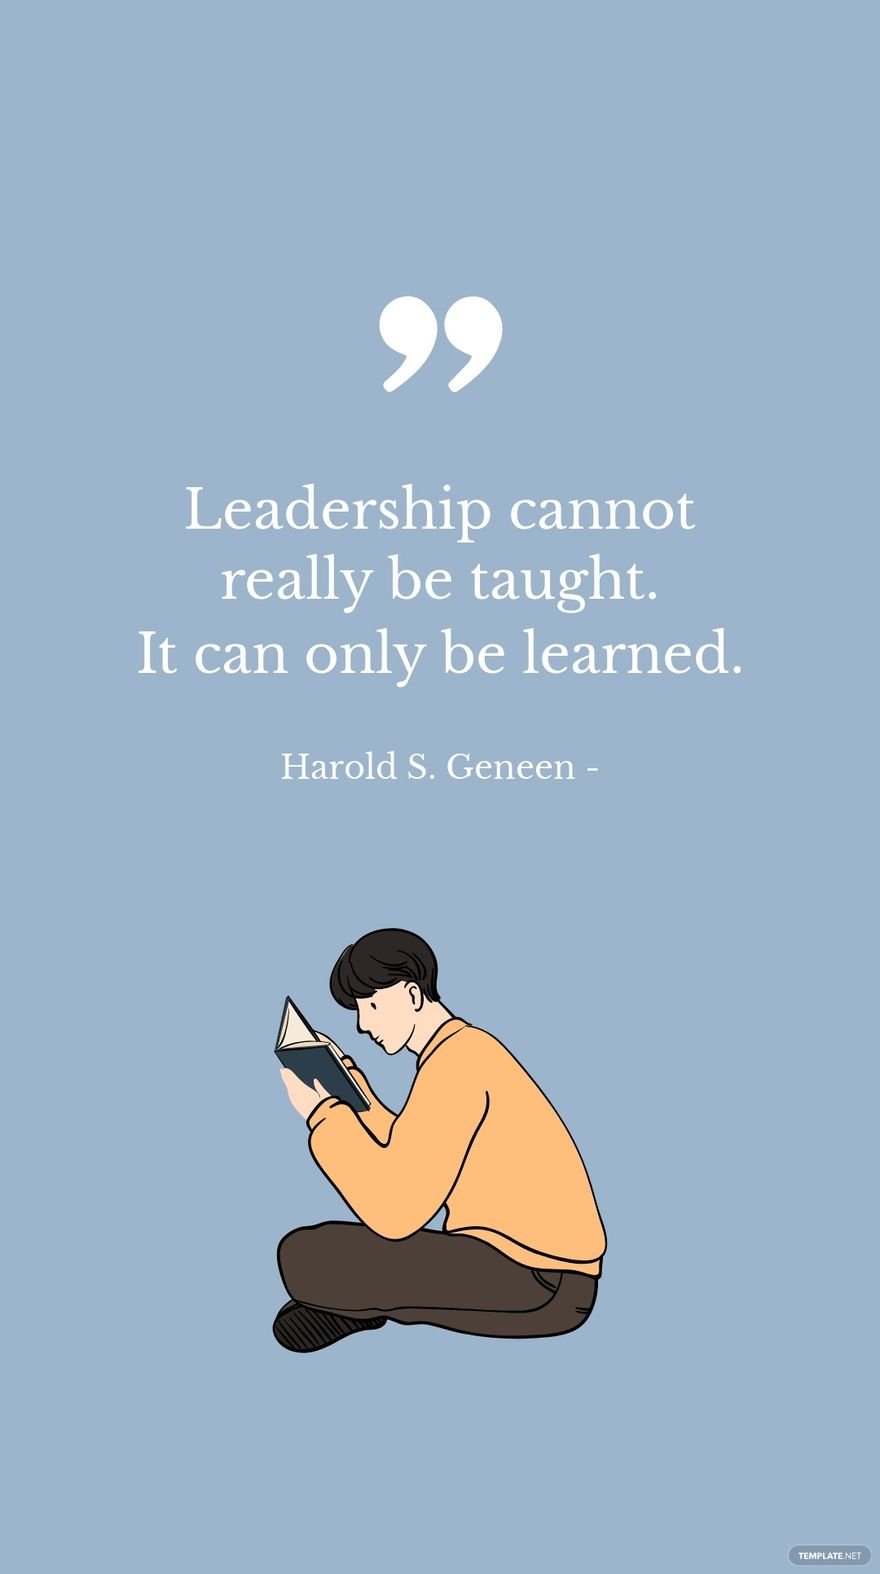 Harold S. Geneen - Leadership cannot really be taught. It can only be learned.